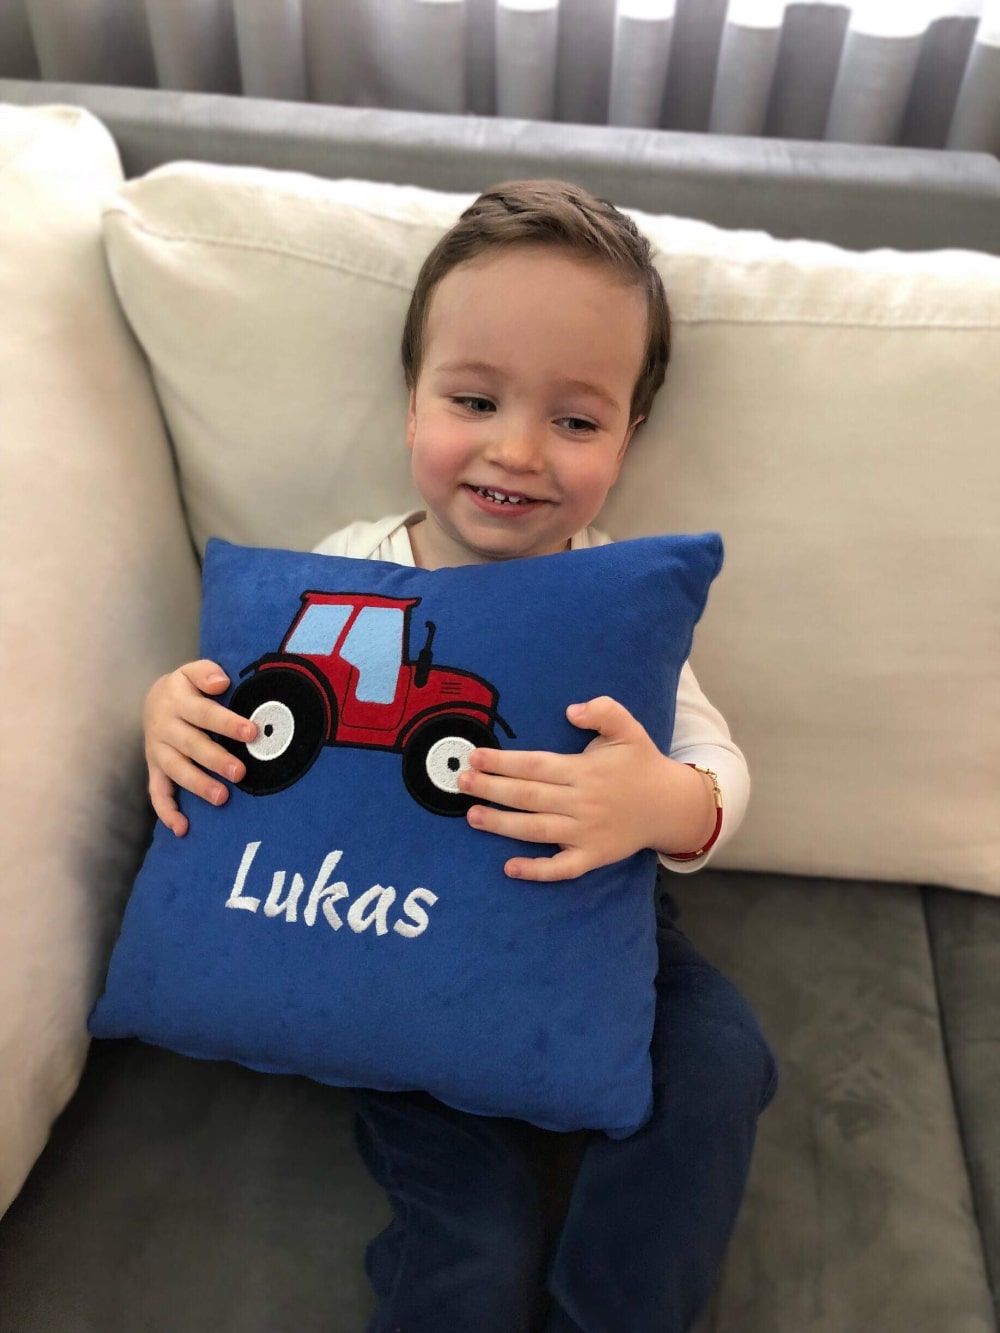 The boy proudly shows off his personalized cushion, with a vibrant design and his name on it.